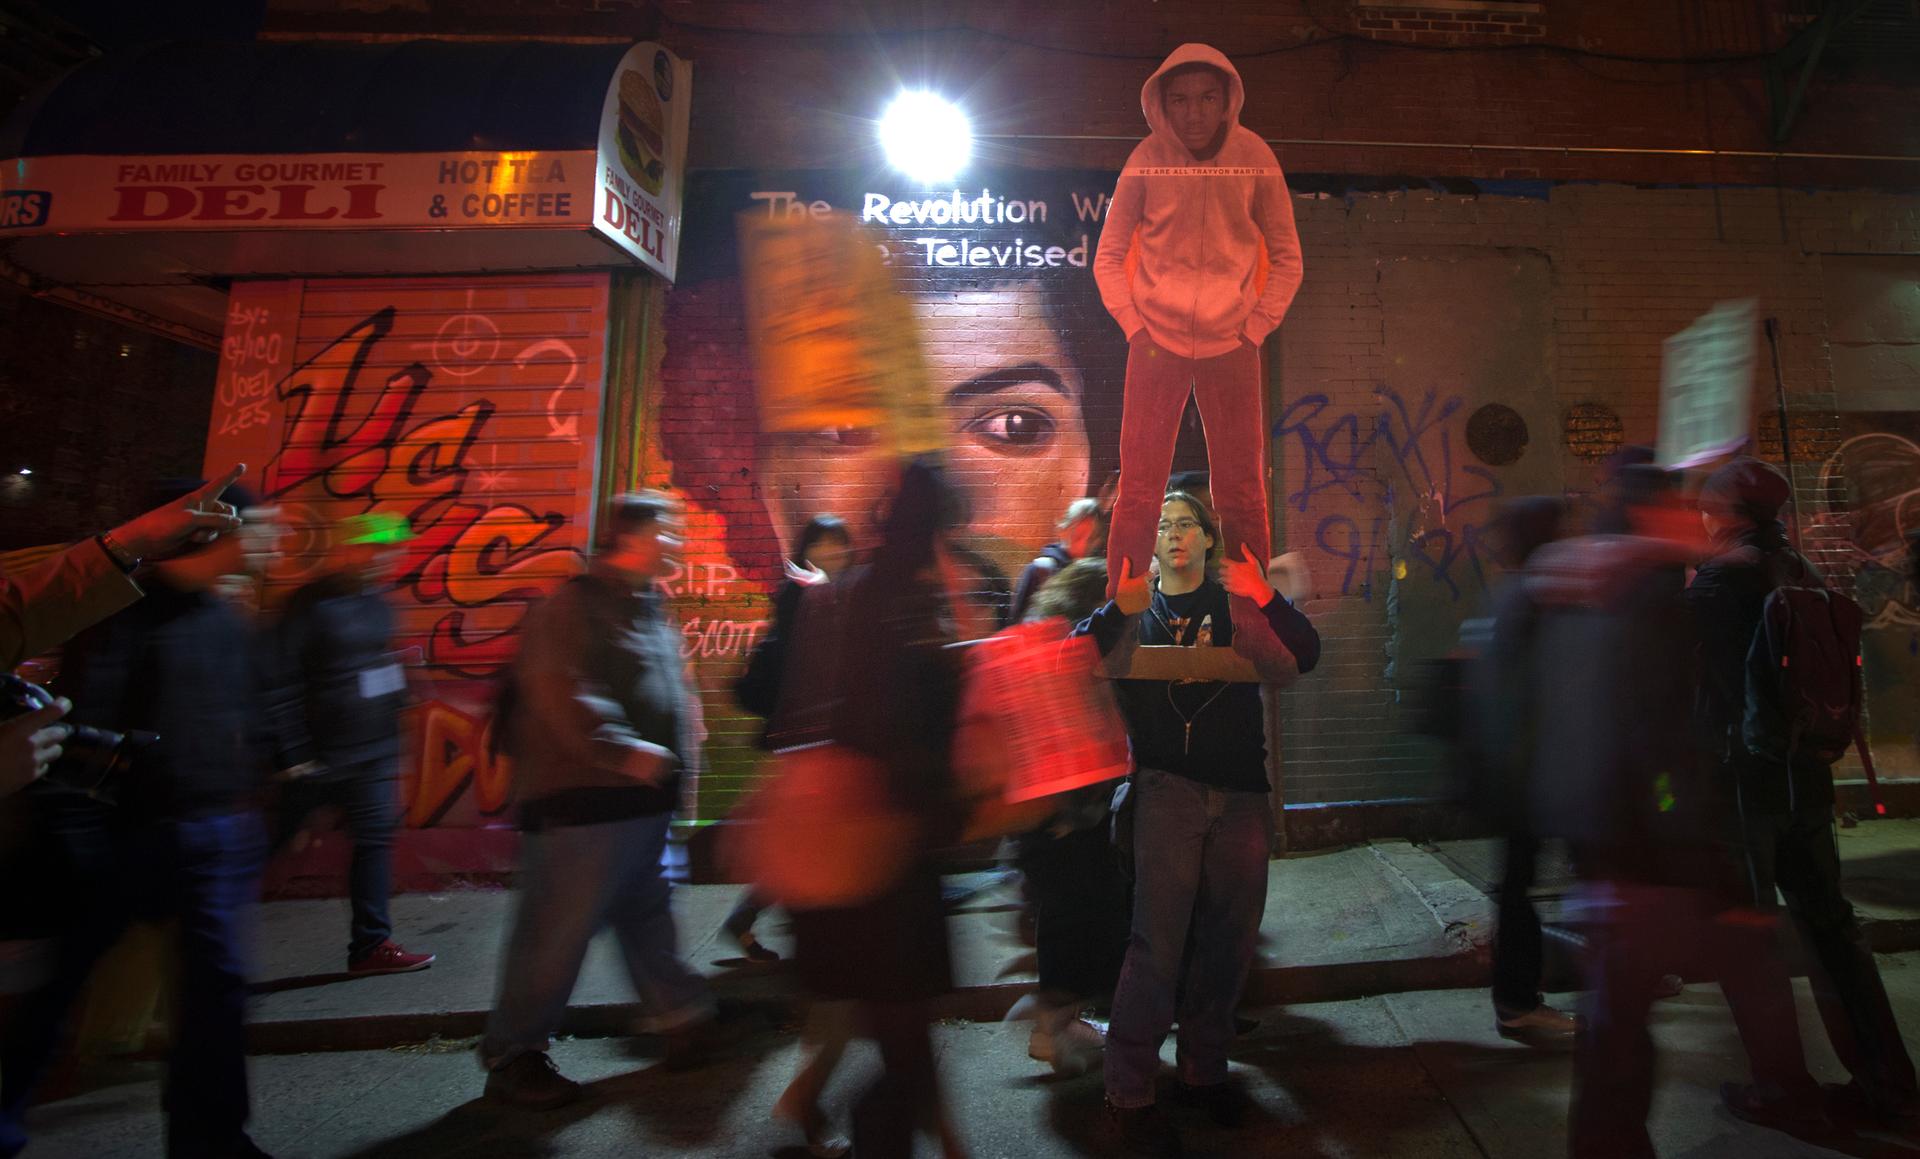 A mural showing Gil Scott-Heron and his trademark phrase, "The Revolution Will Not Be Televised," is the backdrop for protesters marching through the streets of New York in 2012, demanding justice for slain Florida teenager Trayvon Martin.